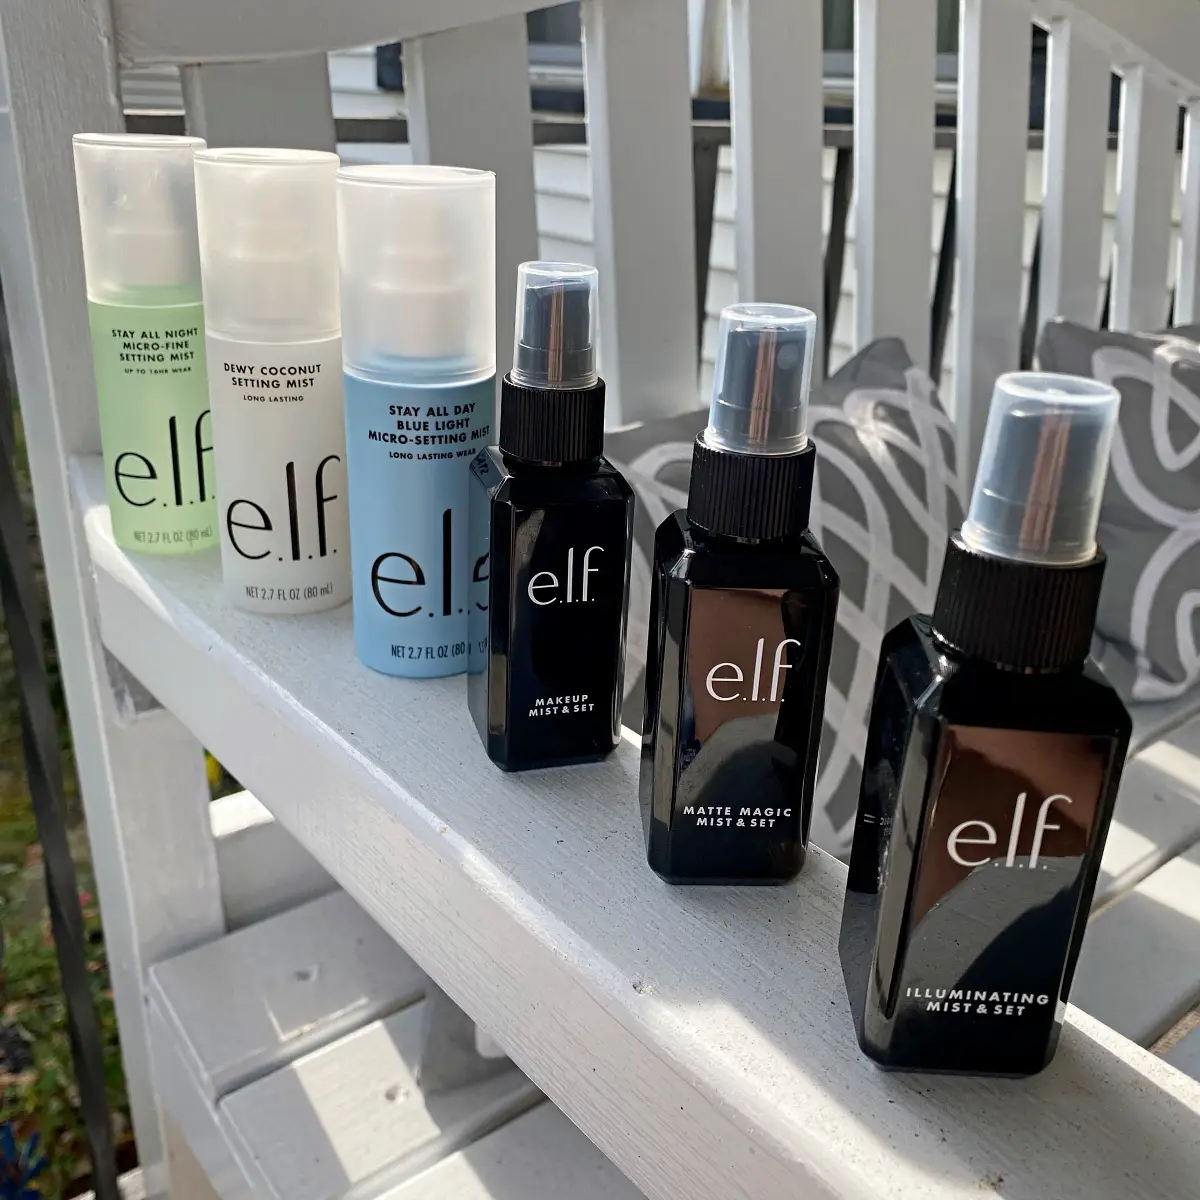 MAKEUP, MAKE UP FOR EVER Mist & Fix Makeup Setting Spray Review, Cosmetic  Proof